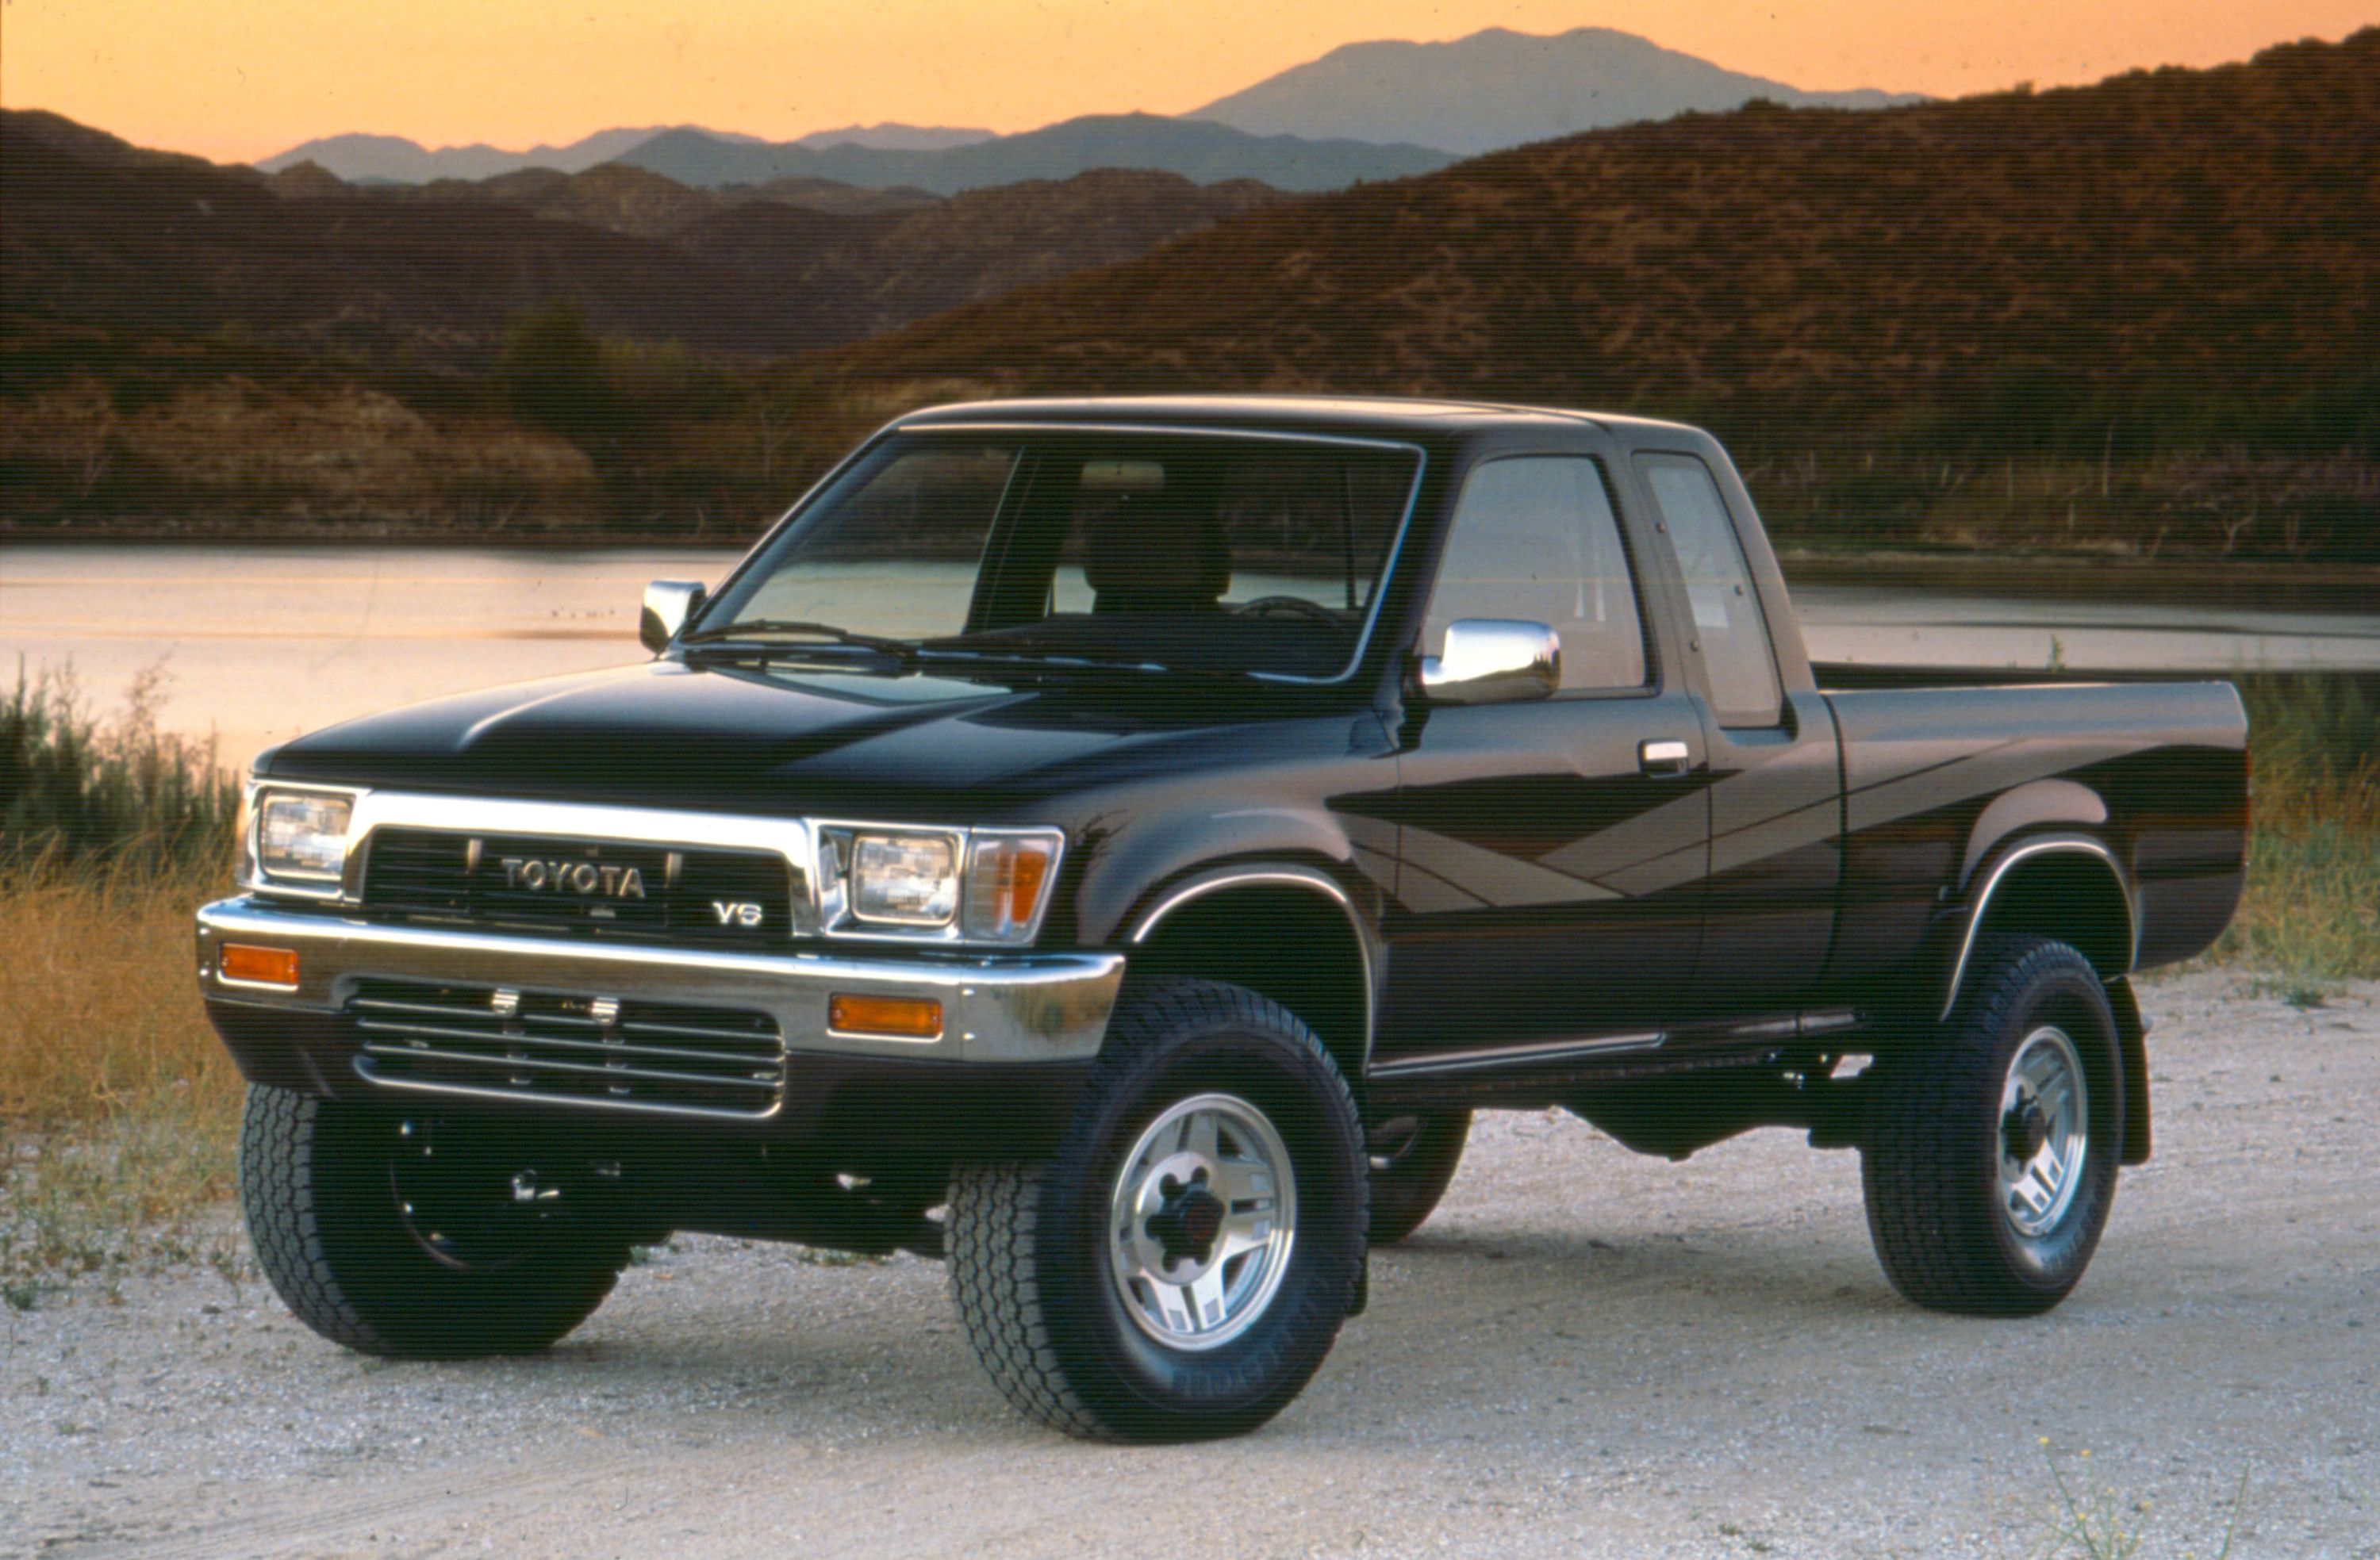 1989 Toyota pickup truck: The best pickup truck of the '80s.